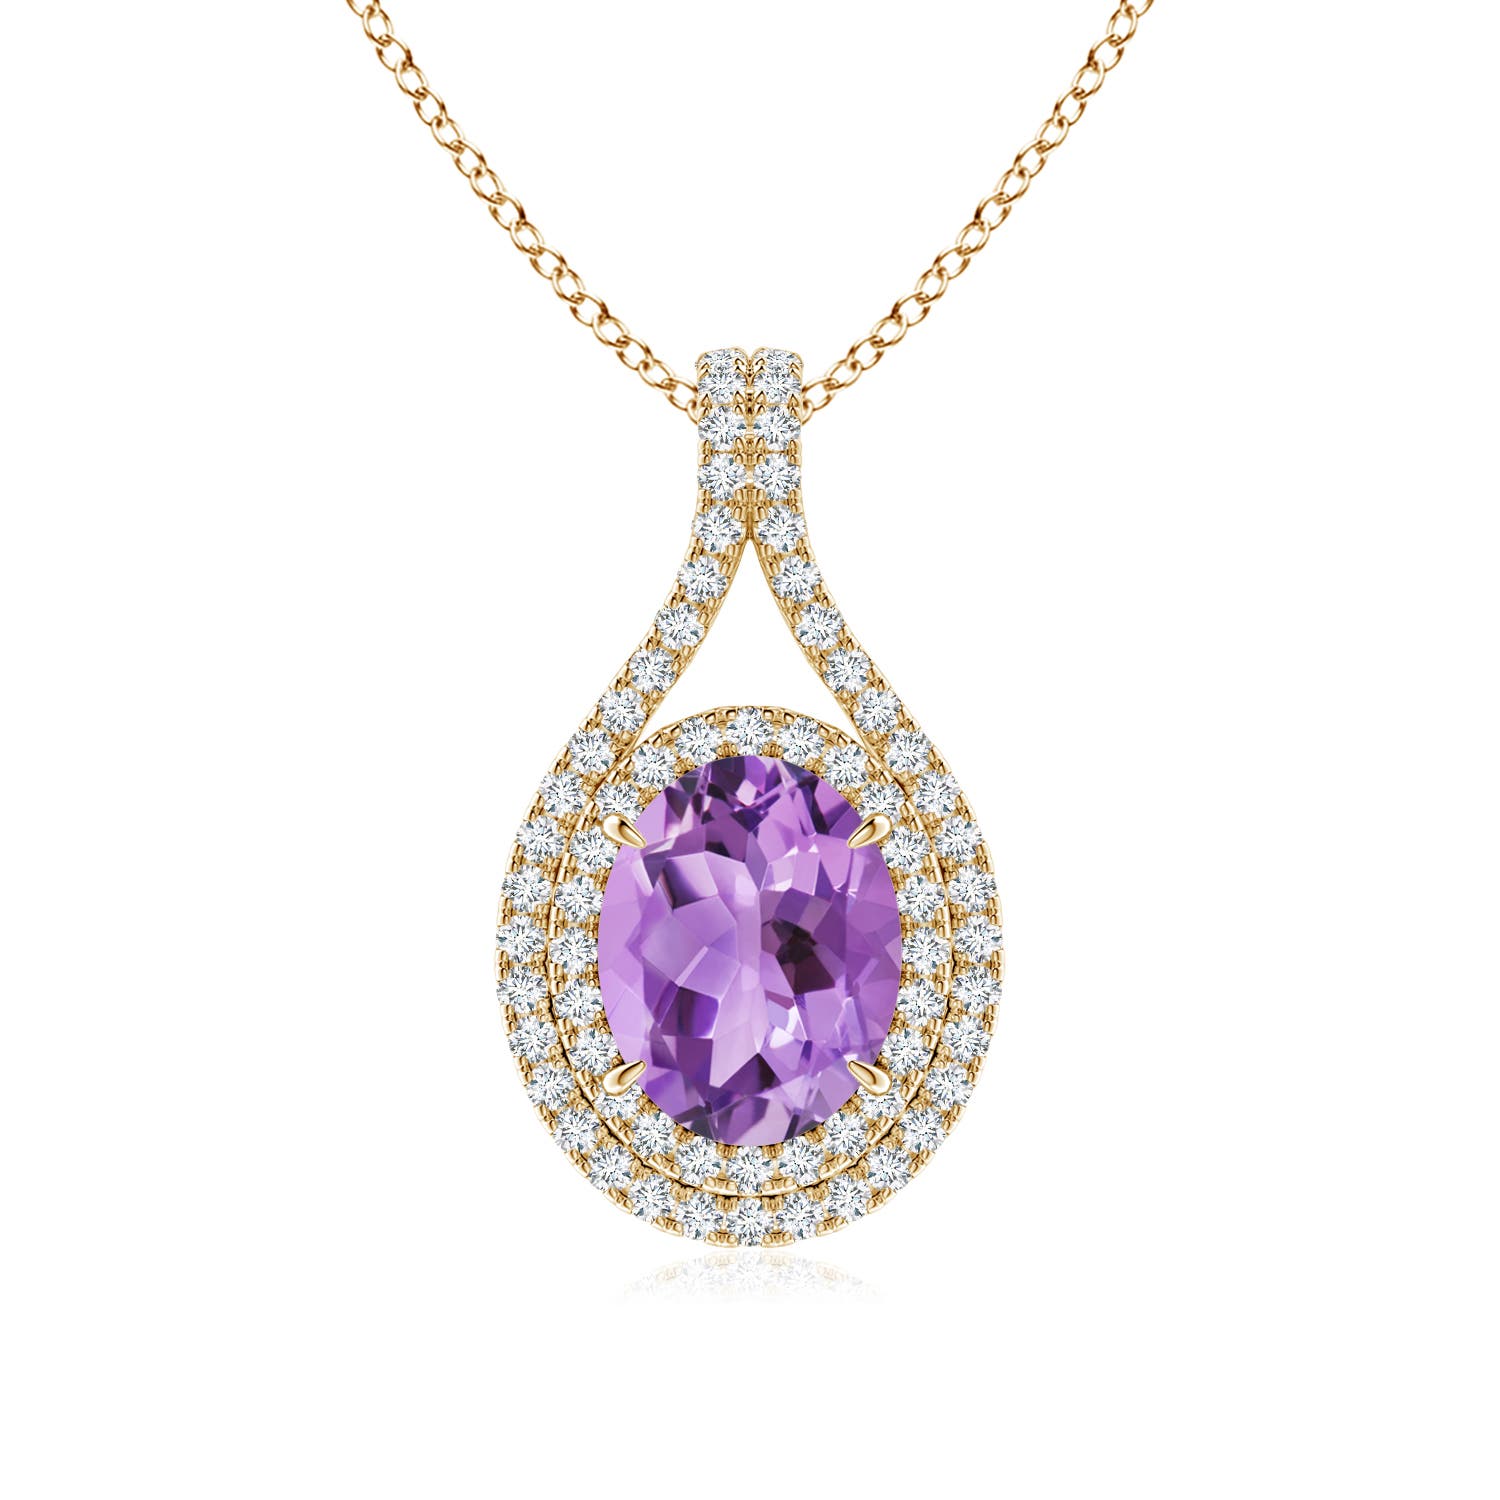 A - Amethyst / 1.95 CT / 14 KT Yellow Gold